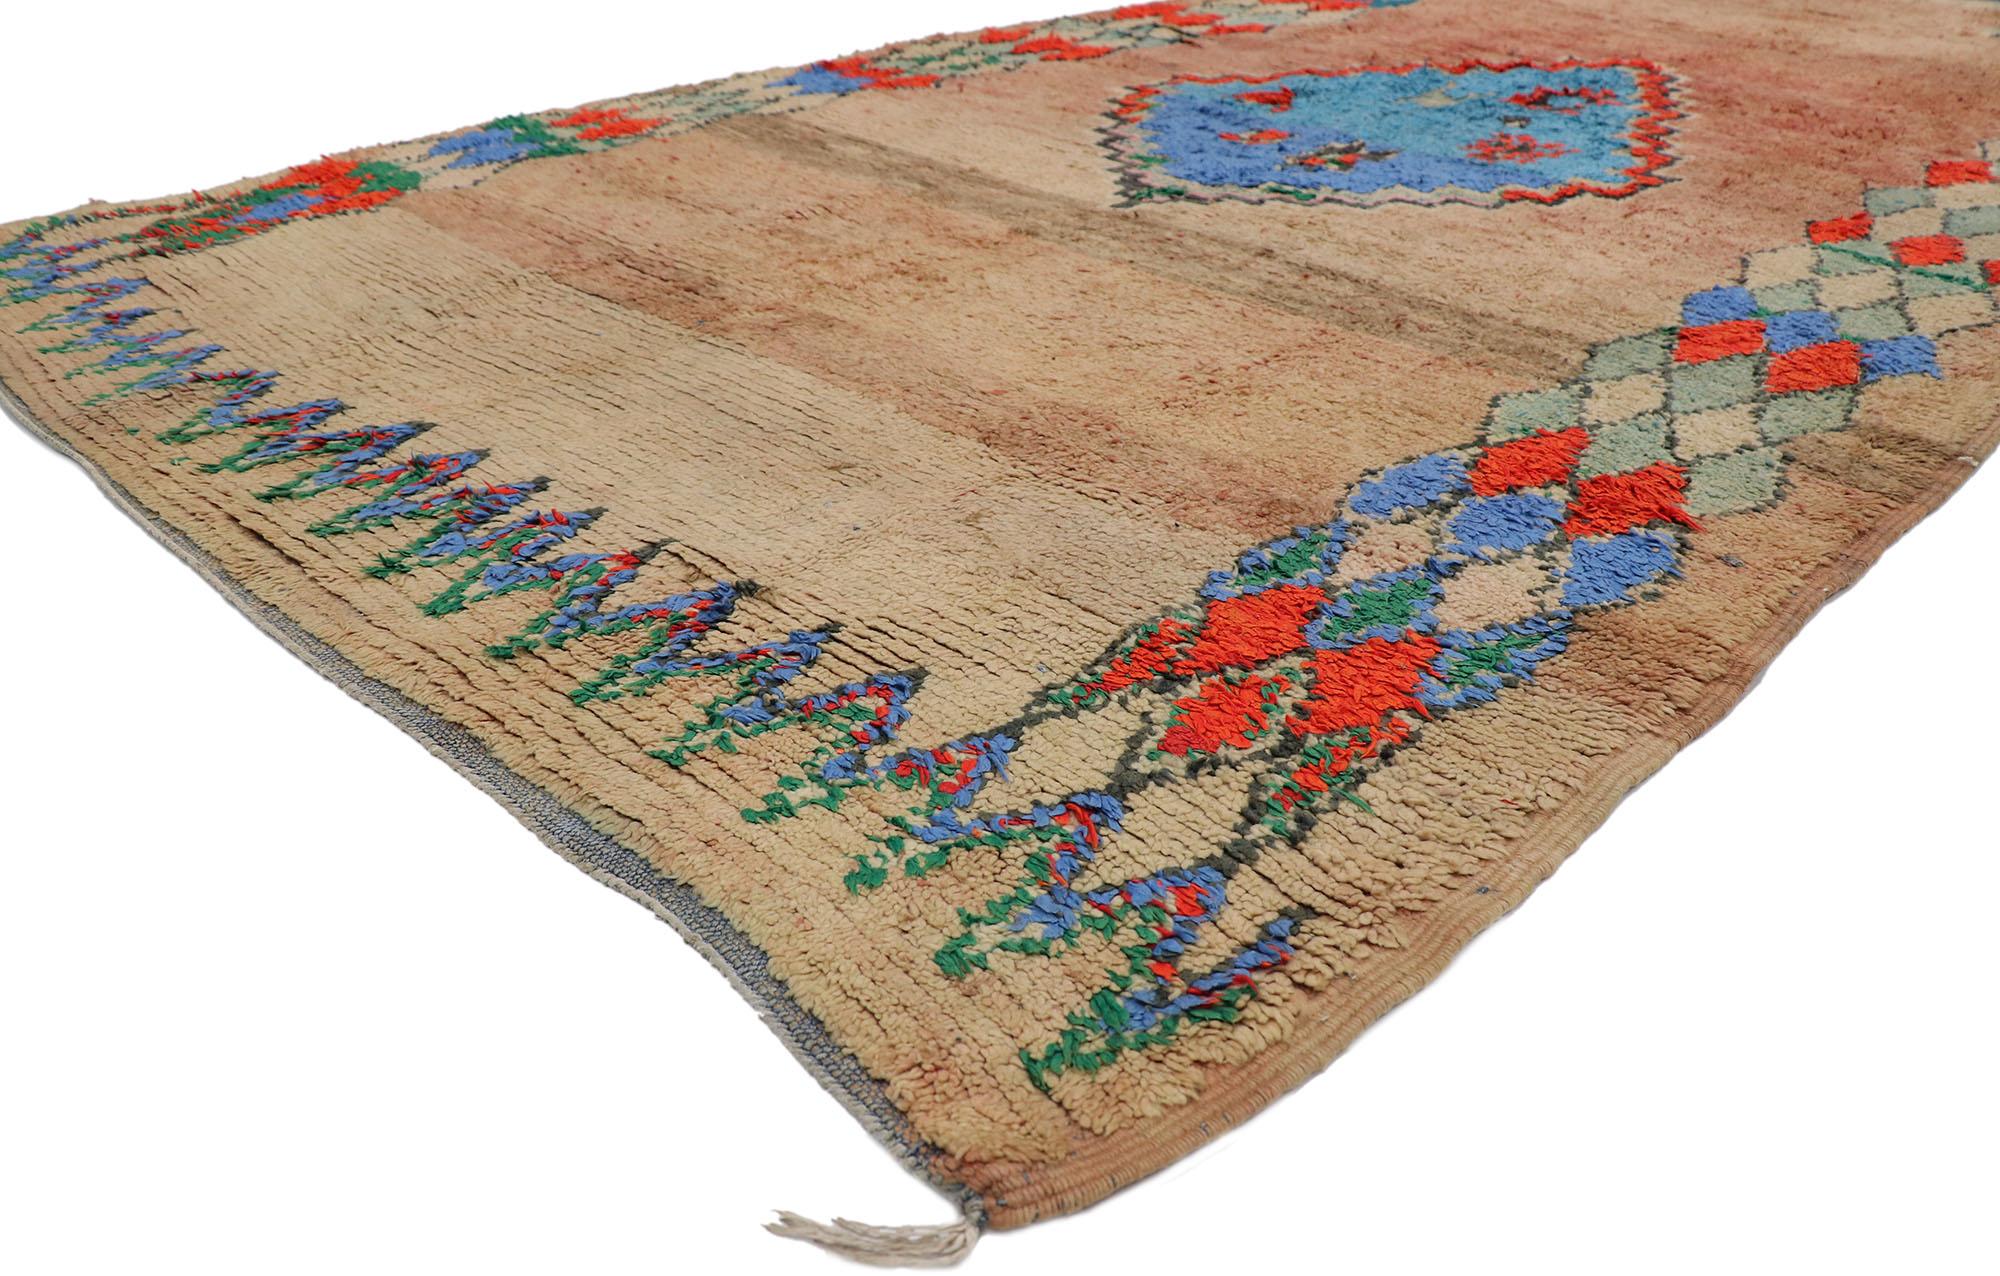 21441 Vintage Berber Boujad Moroccan rug with Tribal Style 06'03 x 12'03. Showcasing an expressive tribal design, incredible detail and texture, this hand knotted wool vintage Berber Boujad Moroccan rug is a captivating vision of woven beauty. The